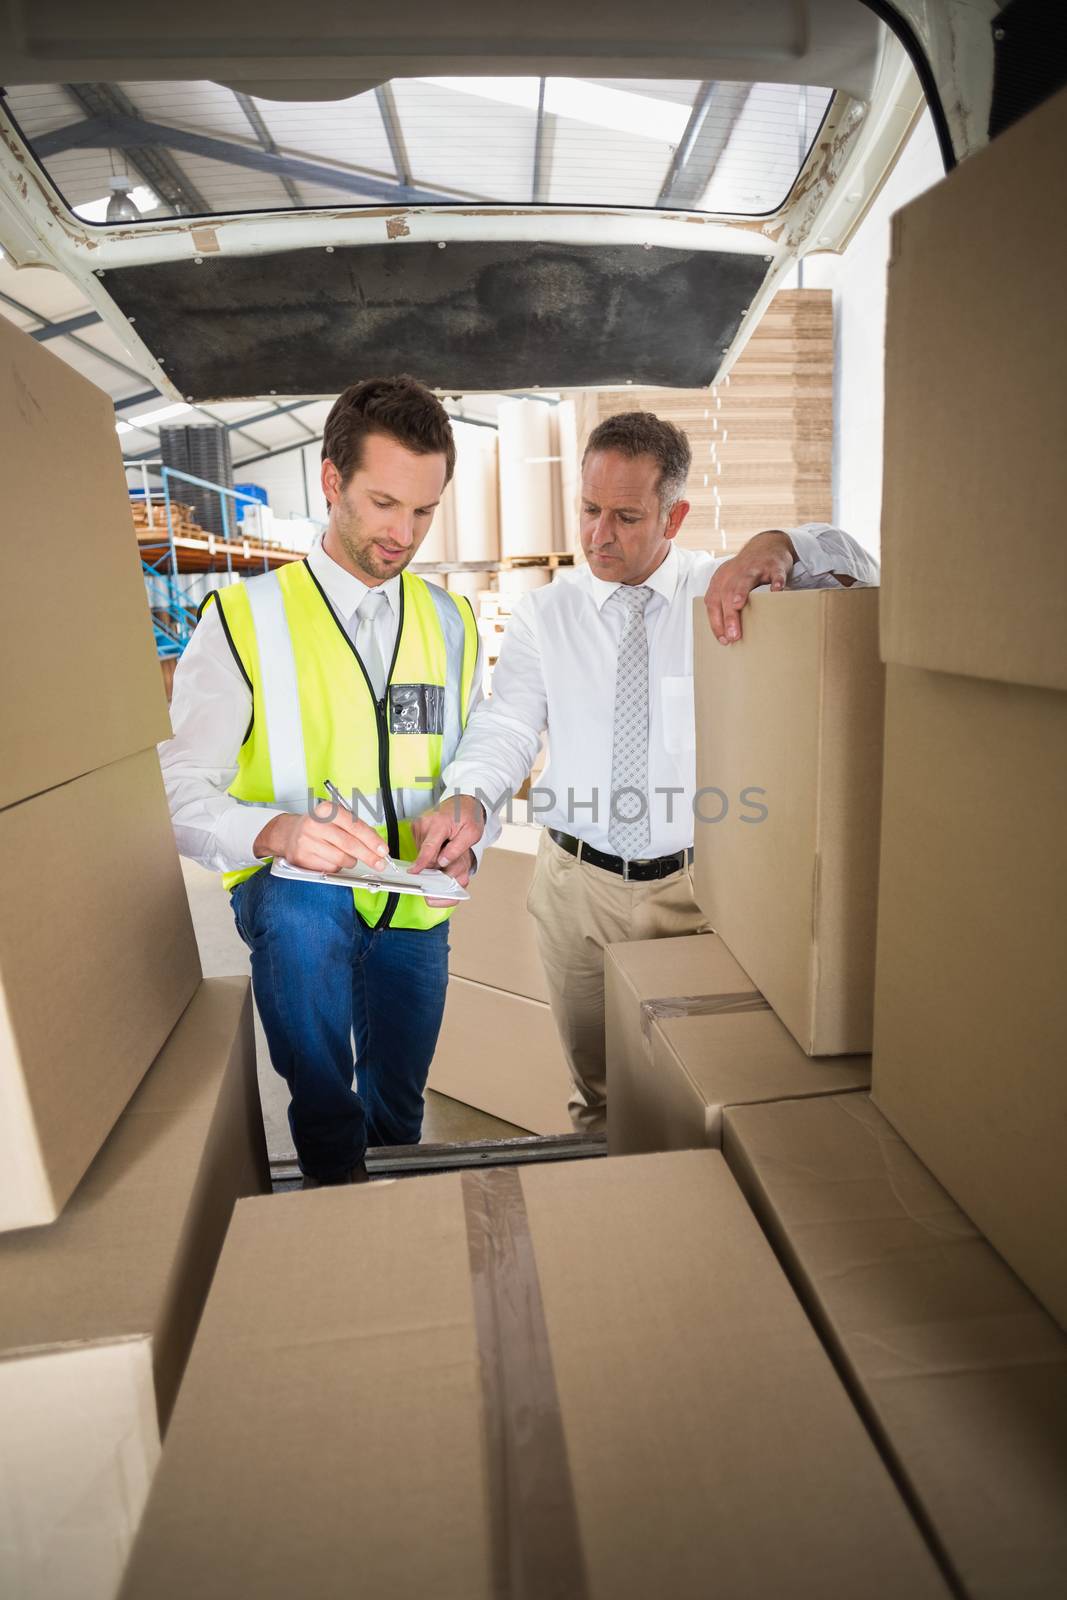 Delivery driver checking his list on clipboard in a large warehouse